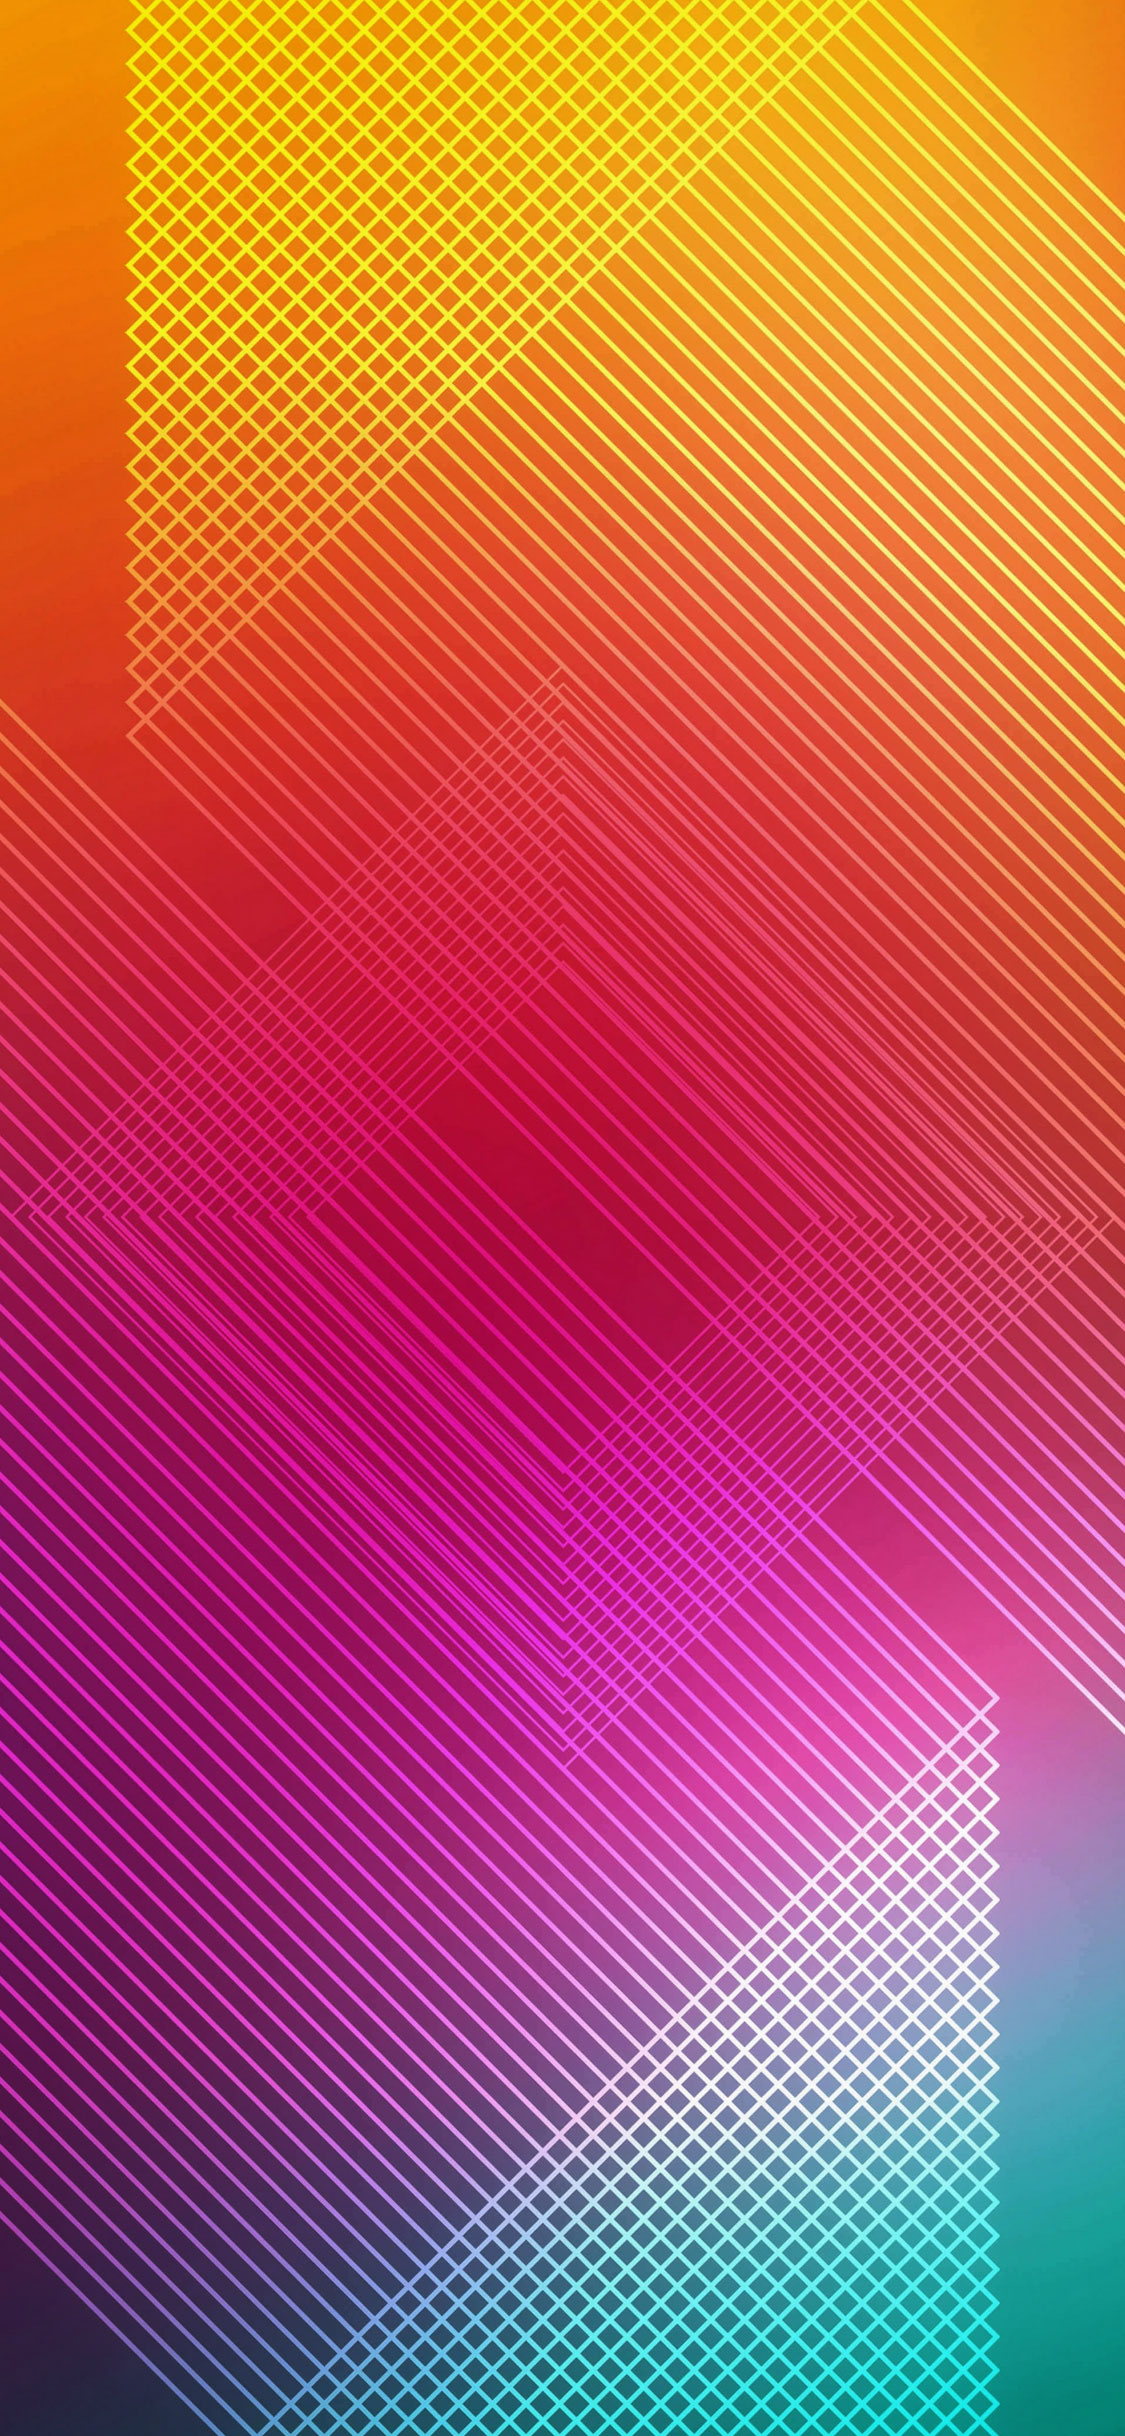 Colorful Iphone Hd Wallpapers